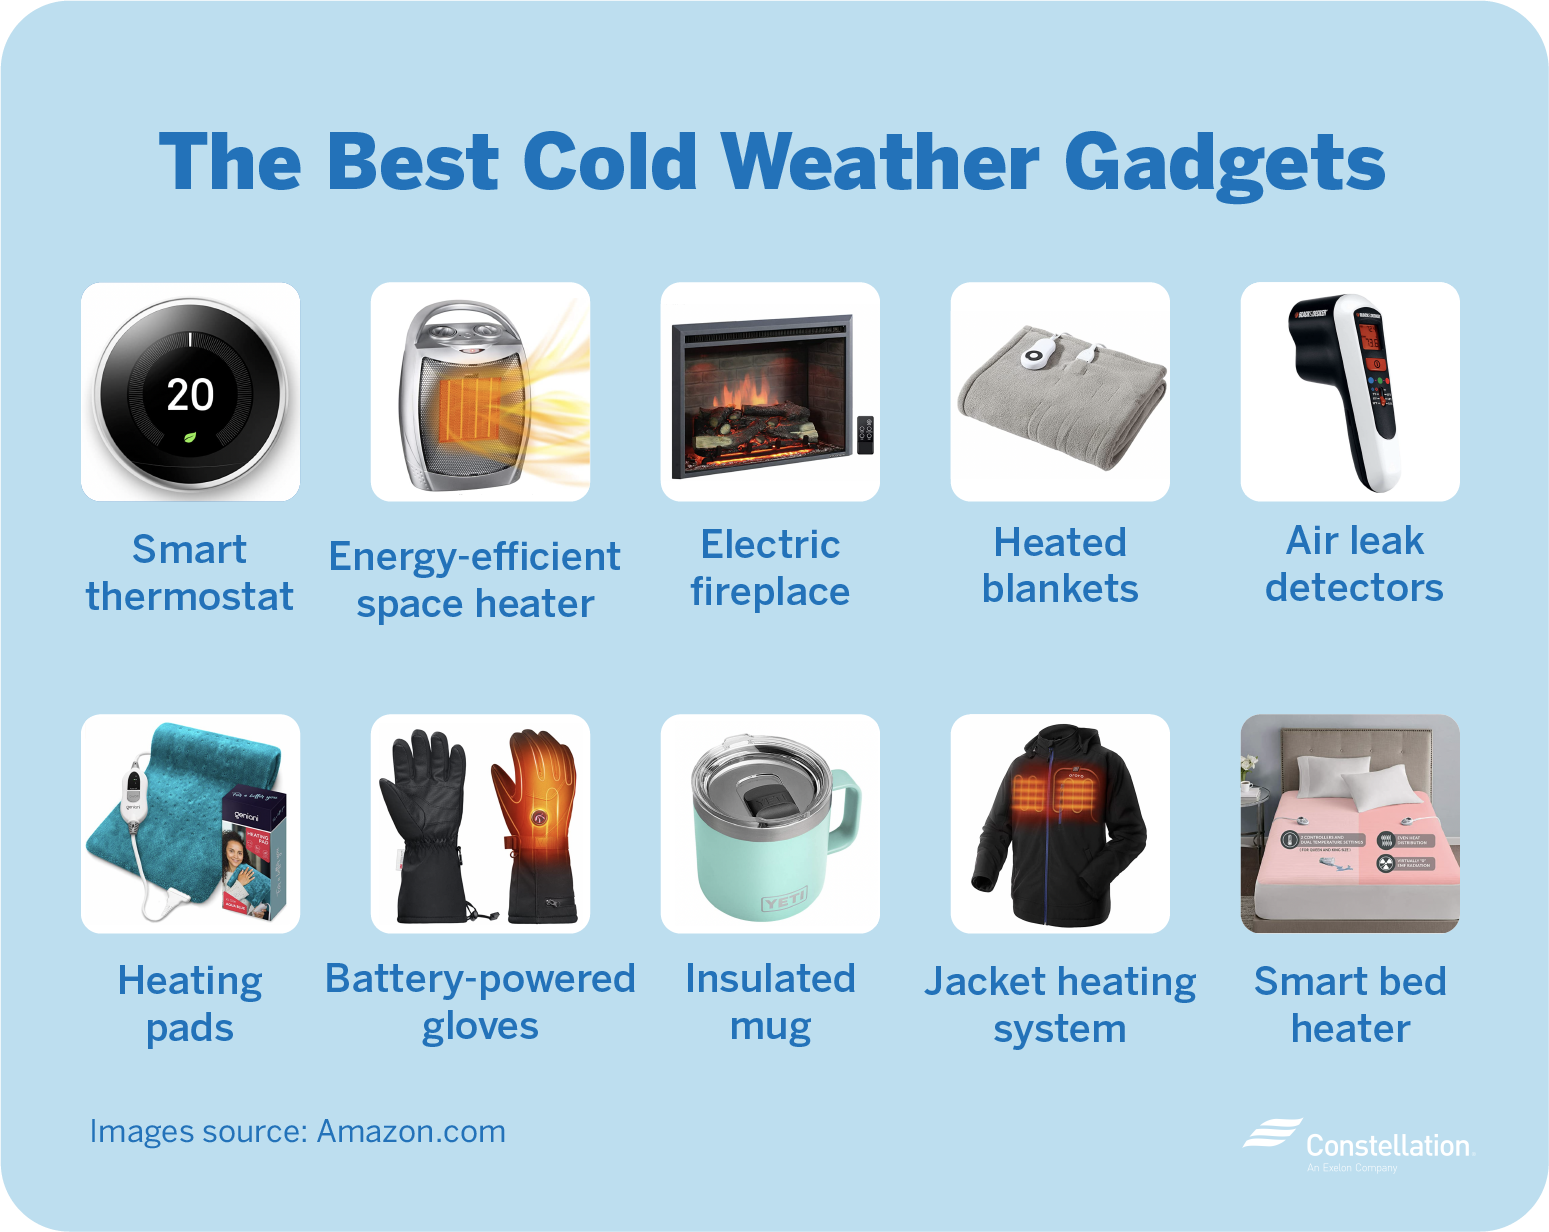 The best cold weather gadgets